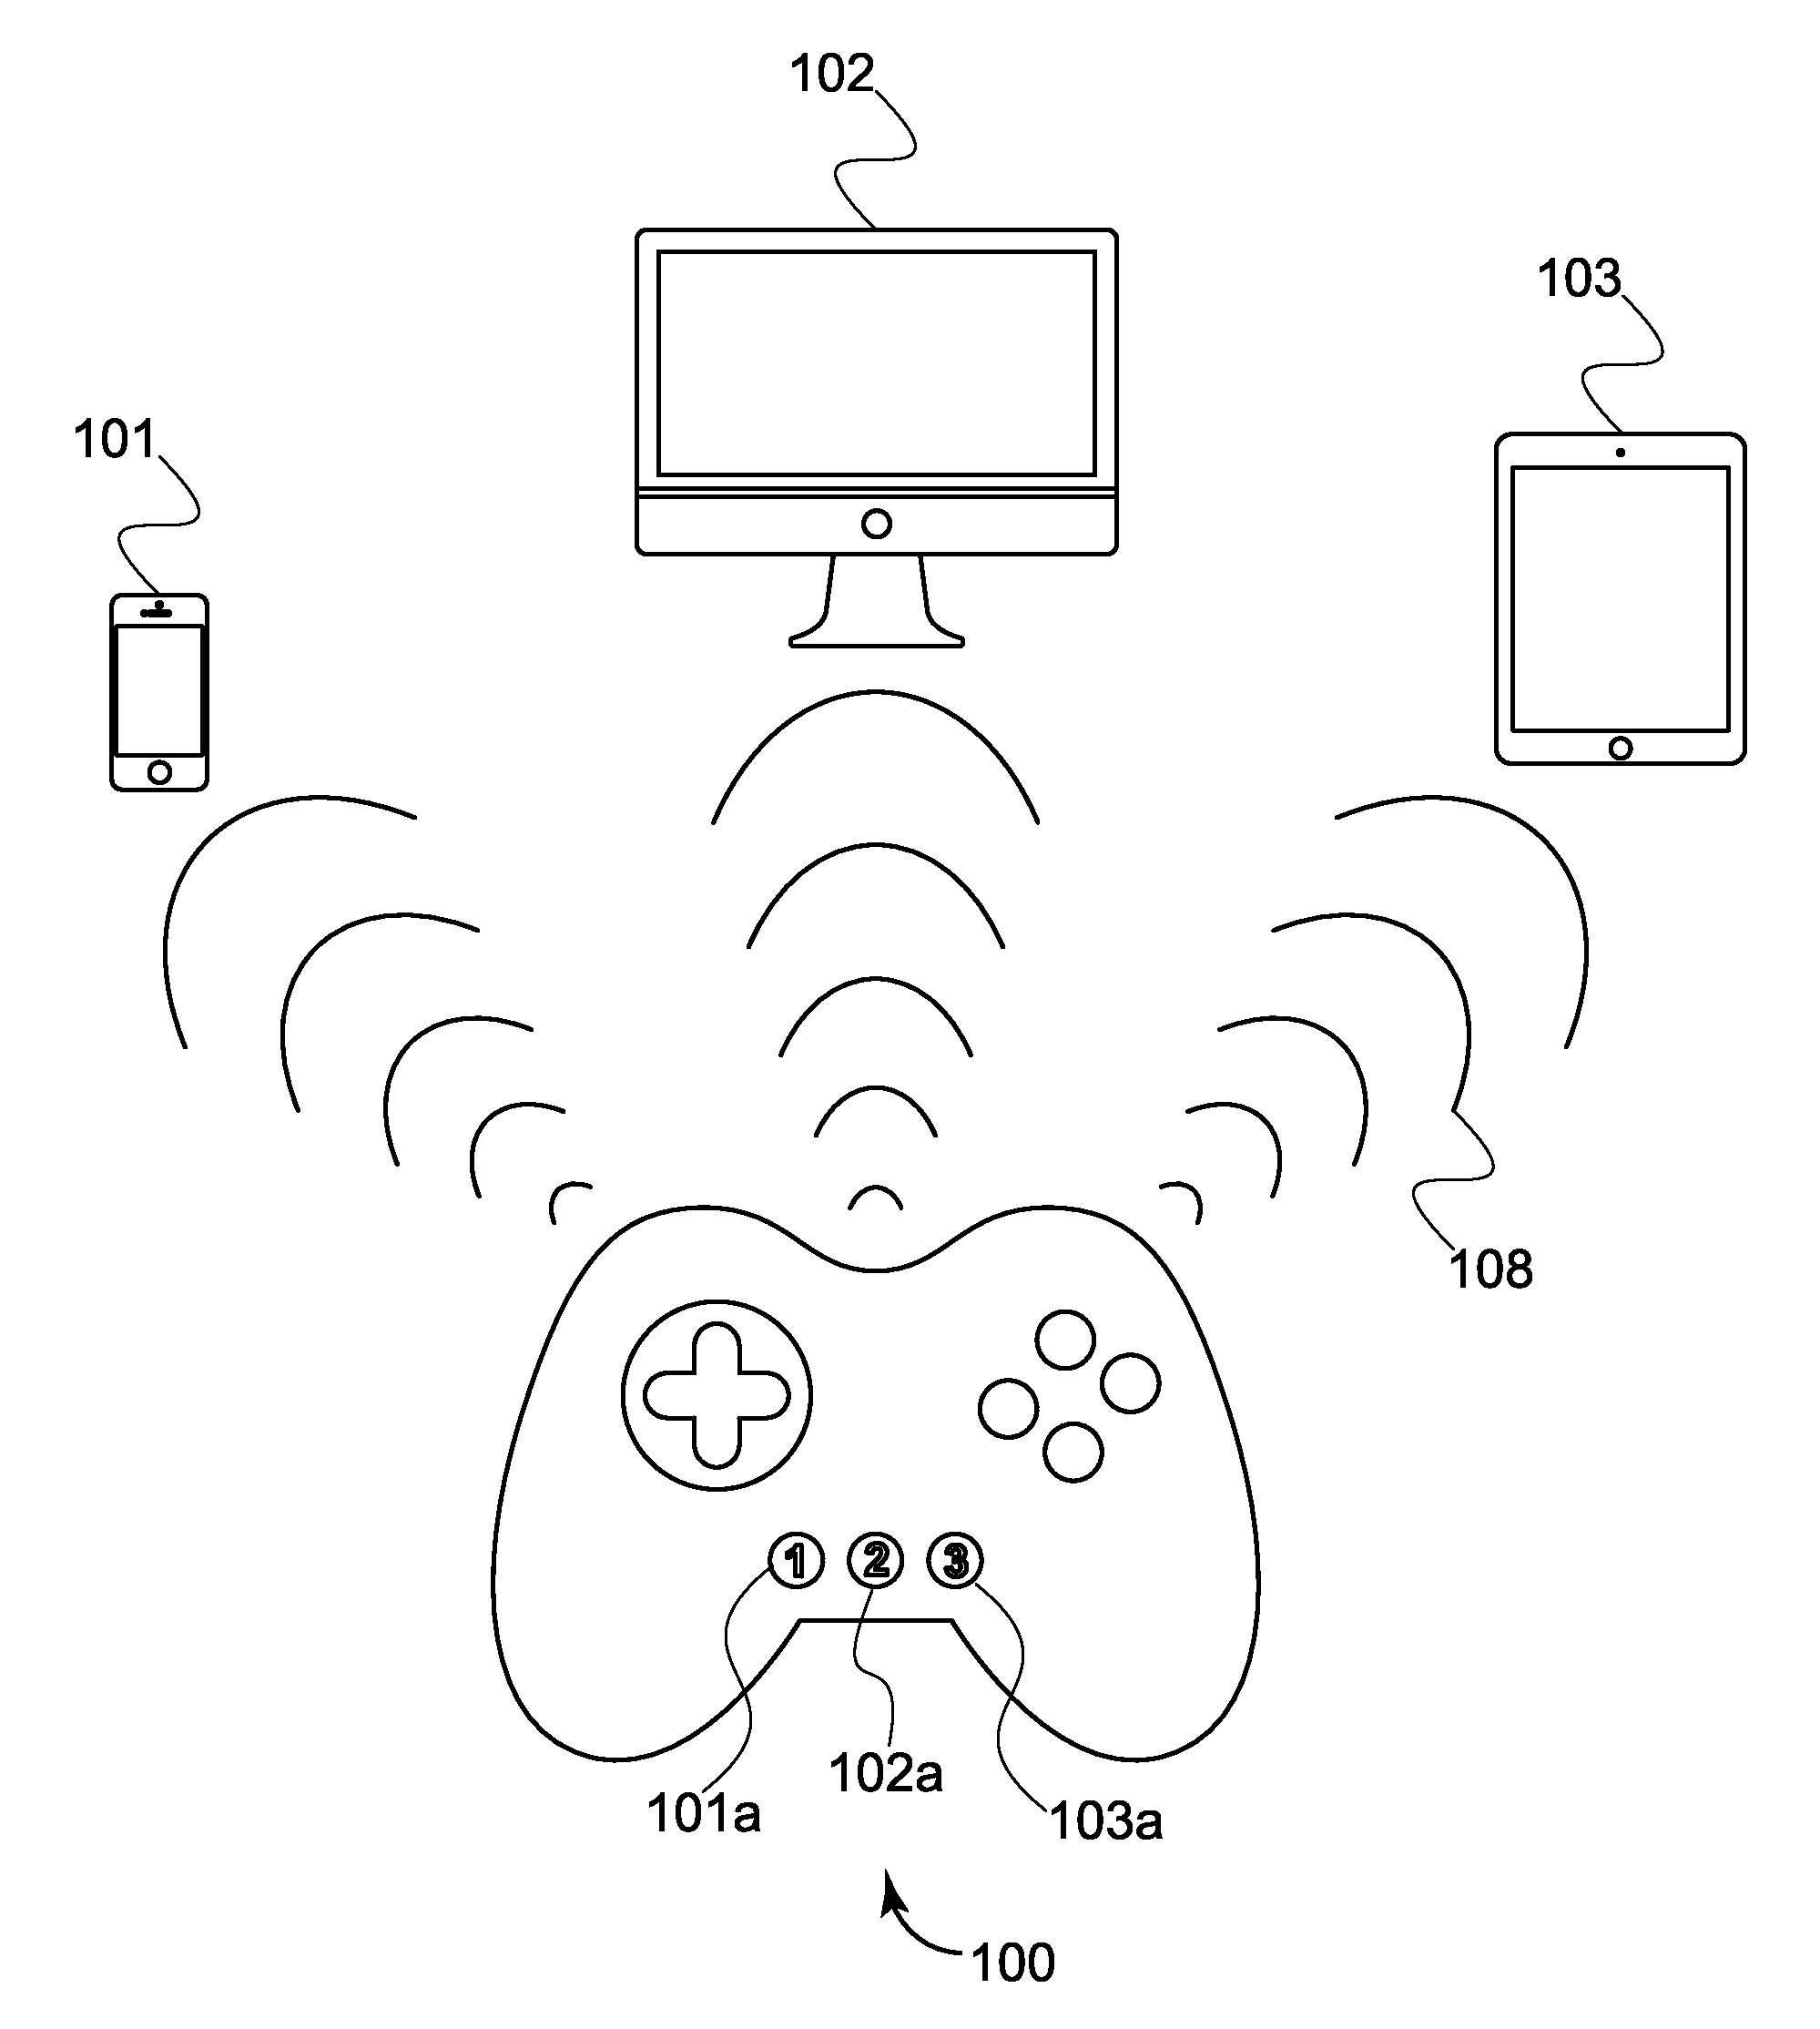 Game controller adapted for a multitude of gaming platforms